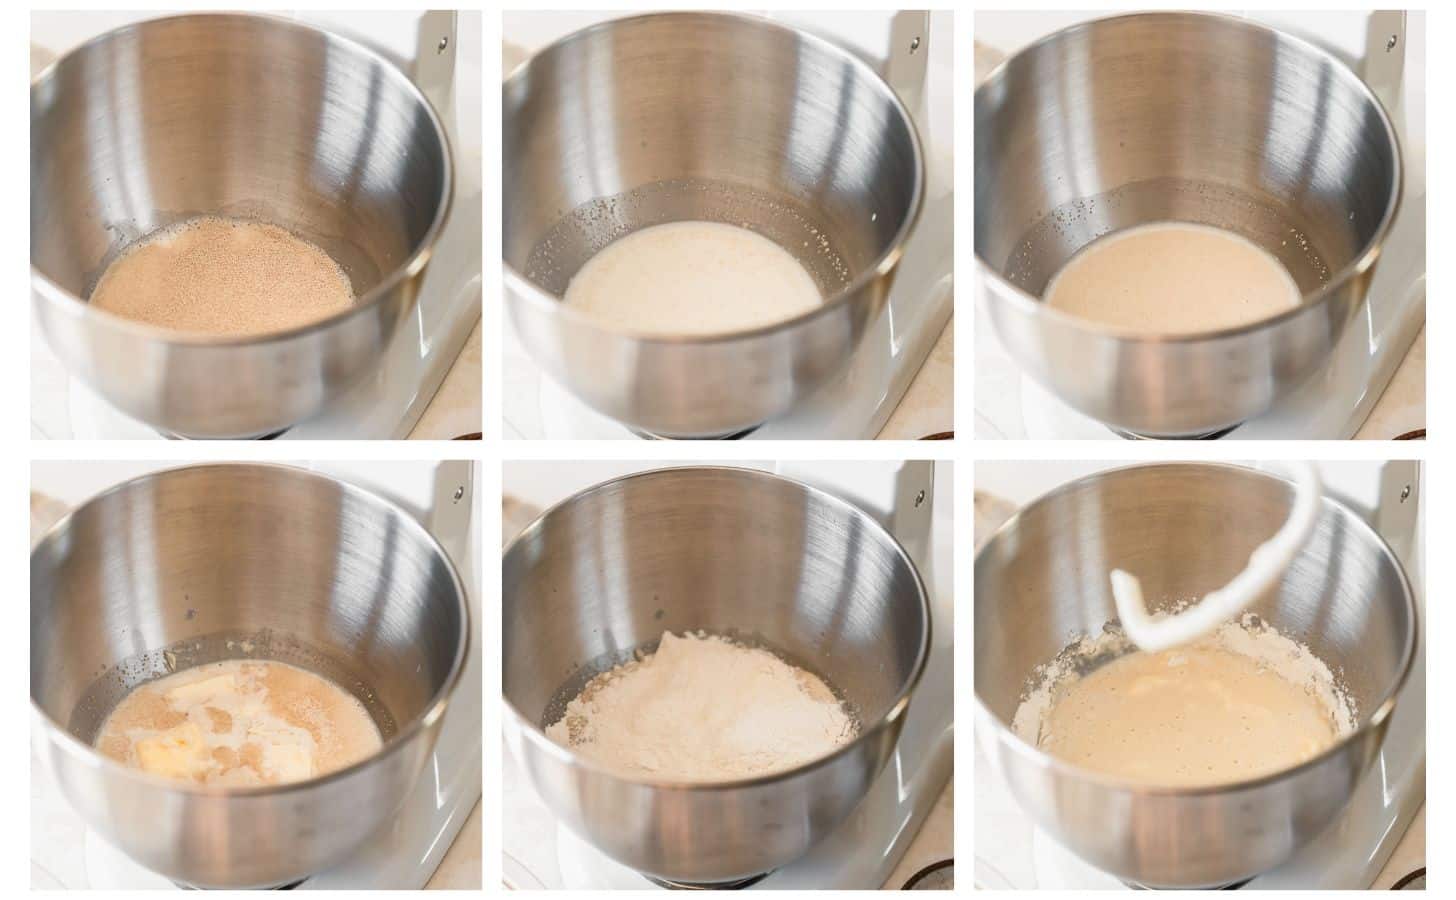 Six steps to making bread dough. In photo 1, a mixing bowl has milk, sugar, and yeast in it. In photo 2, the milk and yeast is mixed together. In photo 3, the yeast is puffy. In photo 4, the mixture has an egg and butter in it. In photo 5, the bowl has flour in it. In photo 6, the mixture is combined.